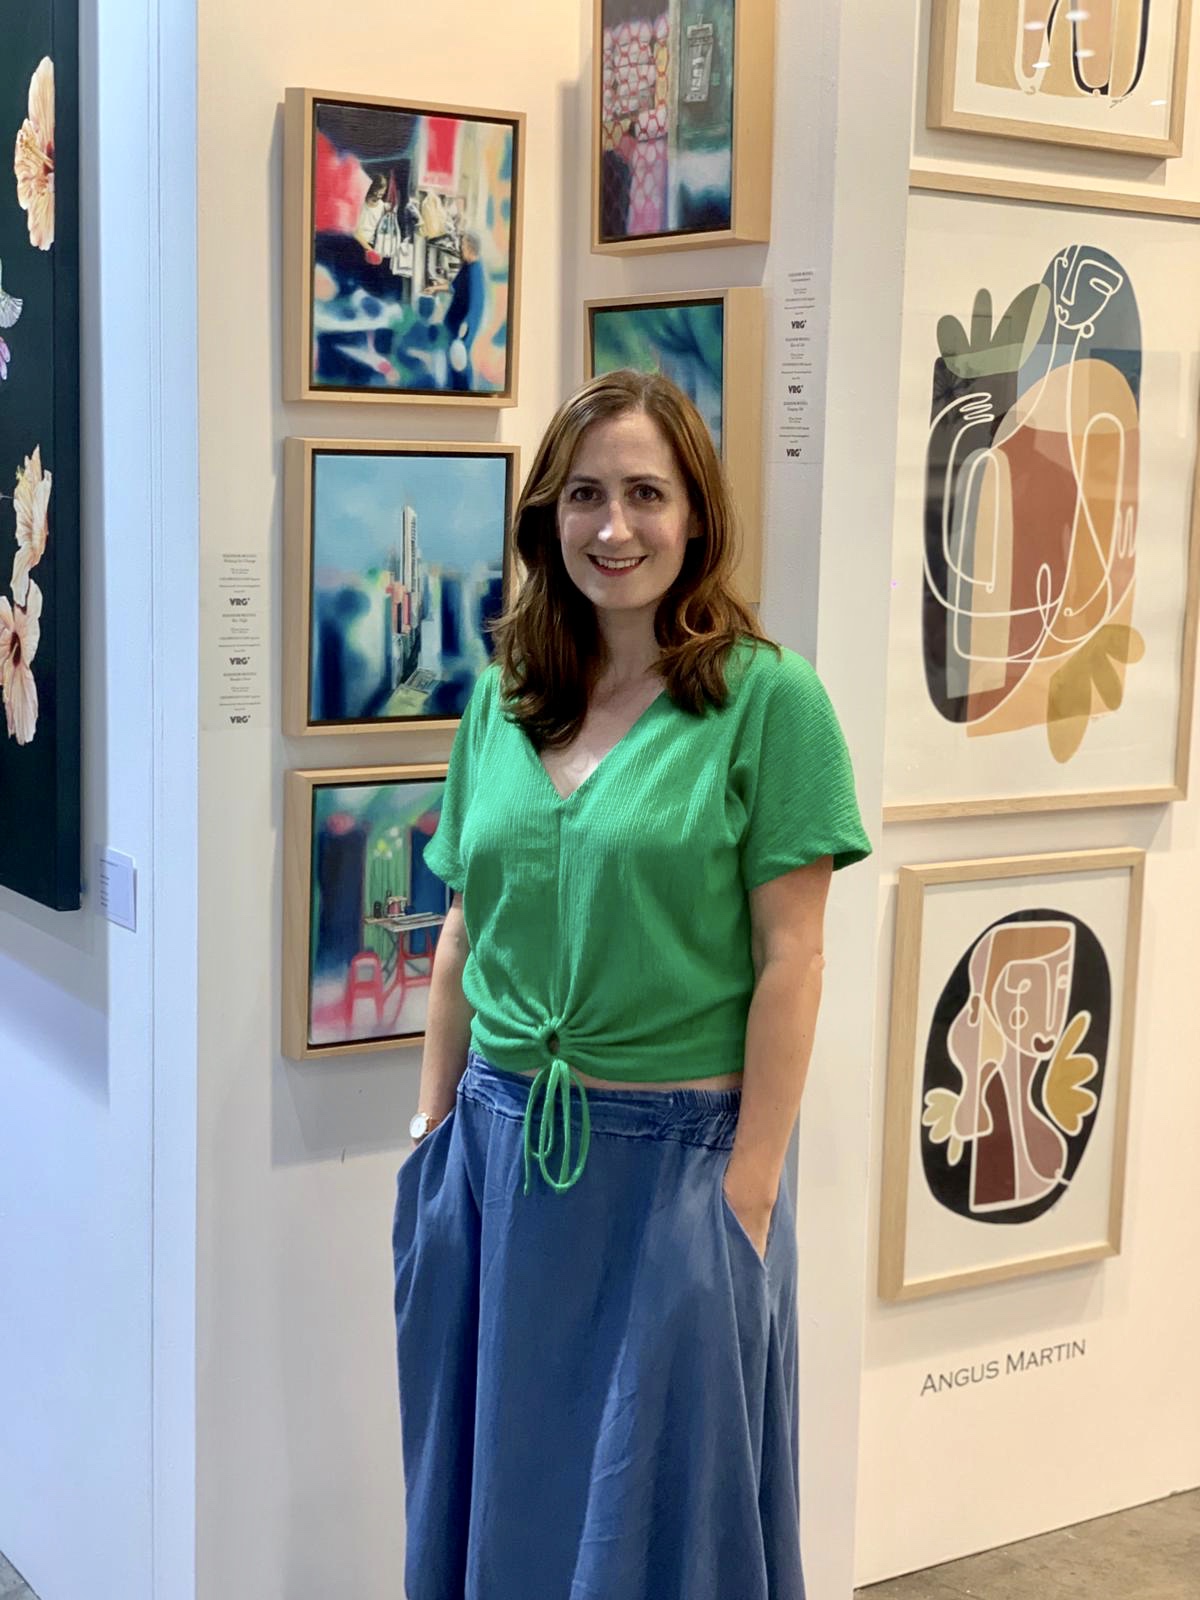 Eleanor standing in front of artworks, wearing a green shirts and smiling to the camera
